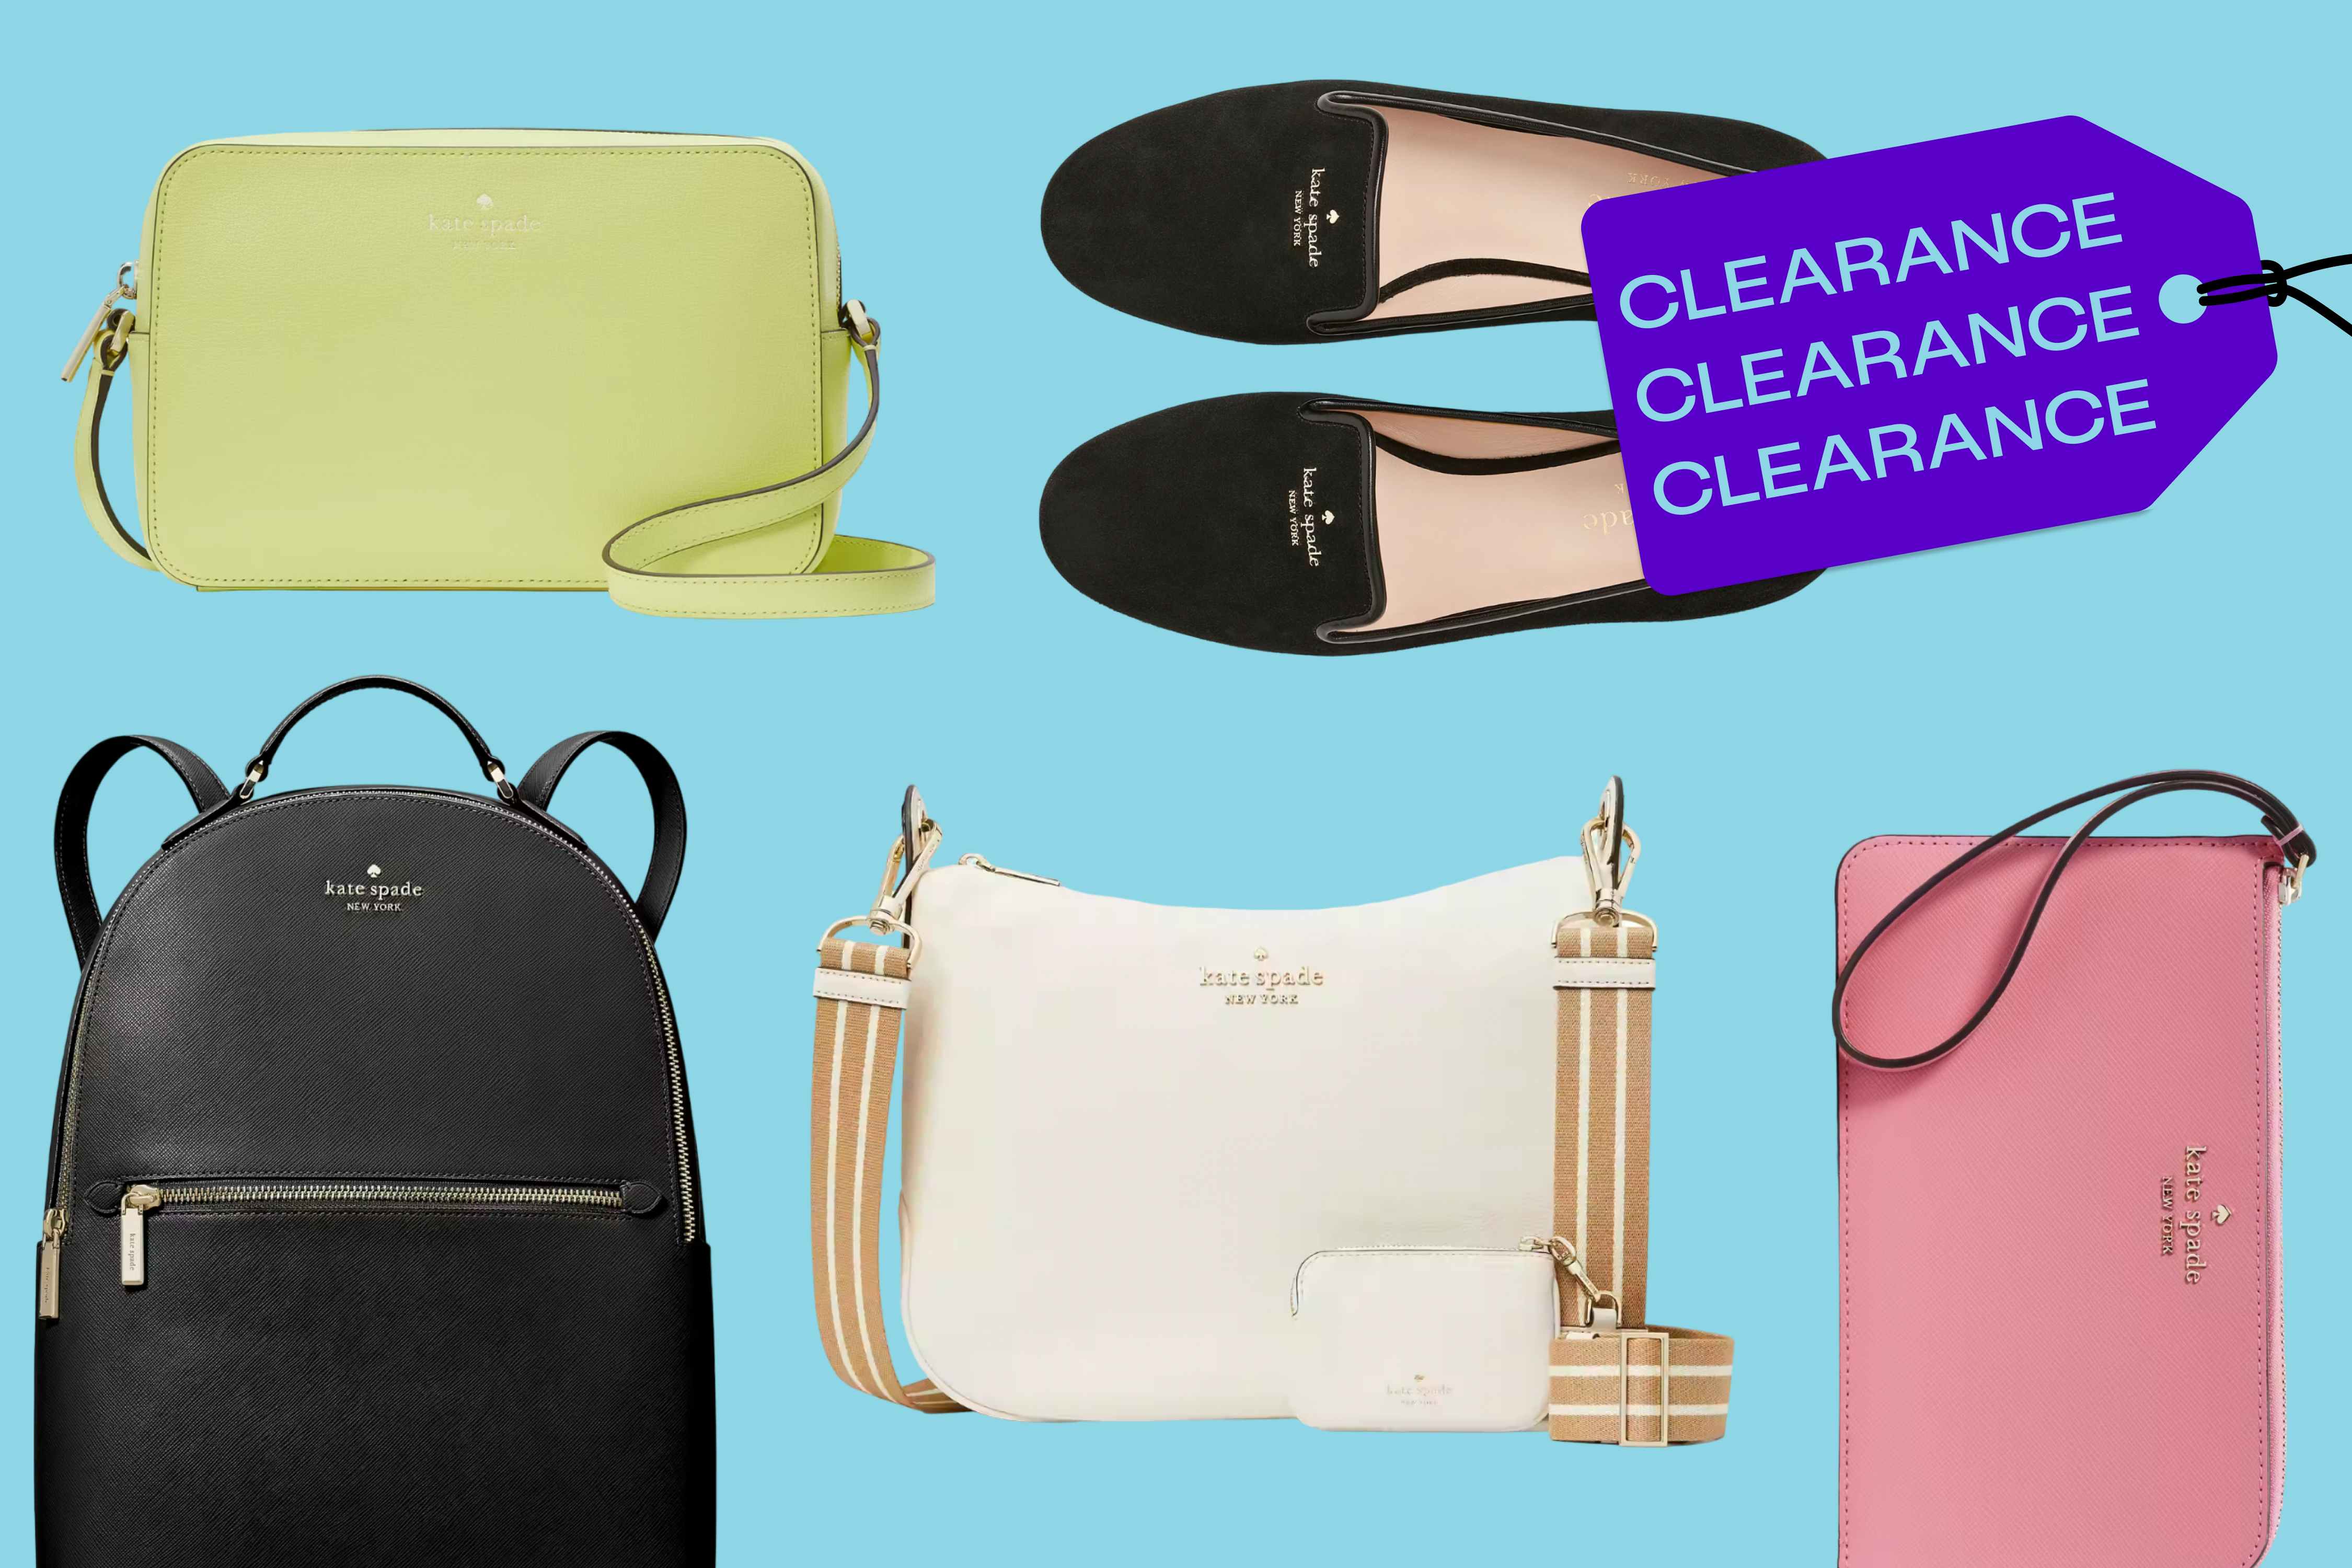 Prices Dropped at Kate Spade Outlet: $15 Earrings, $64 Leather Bag + More